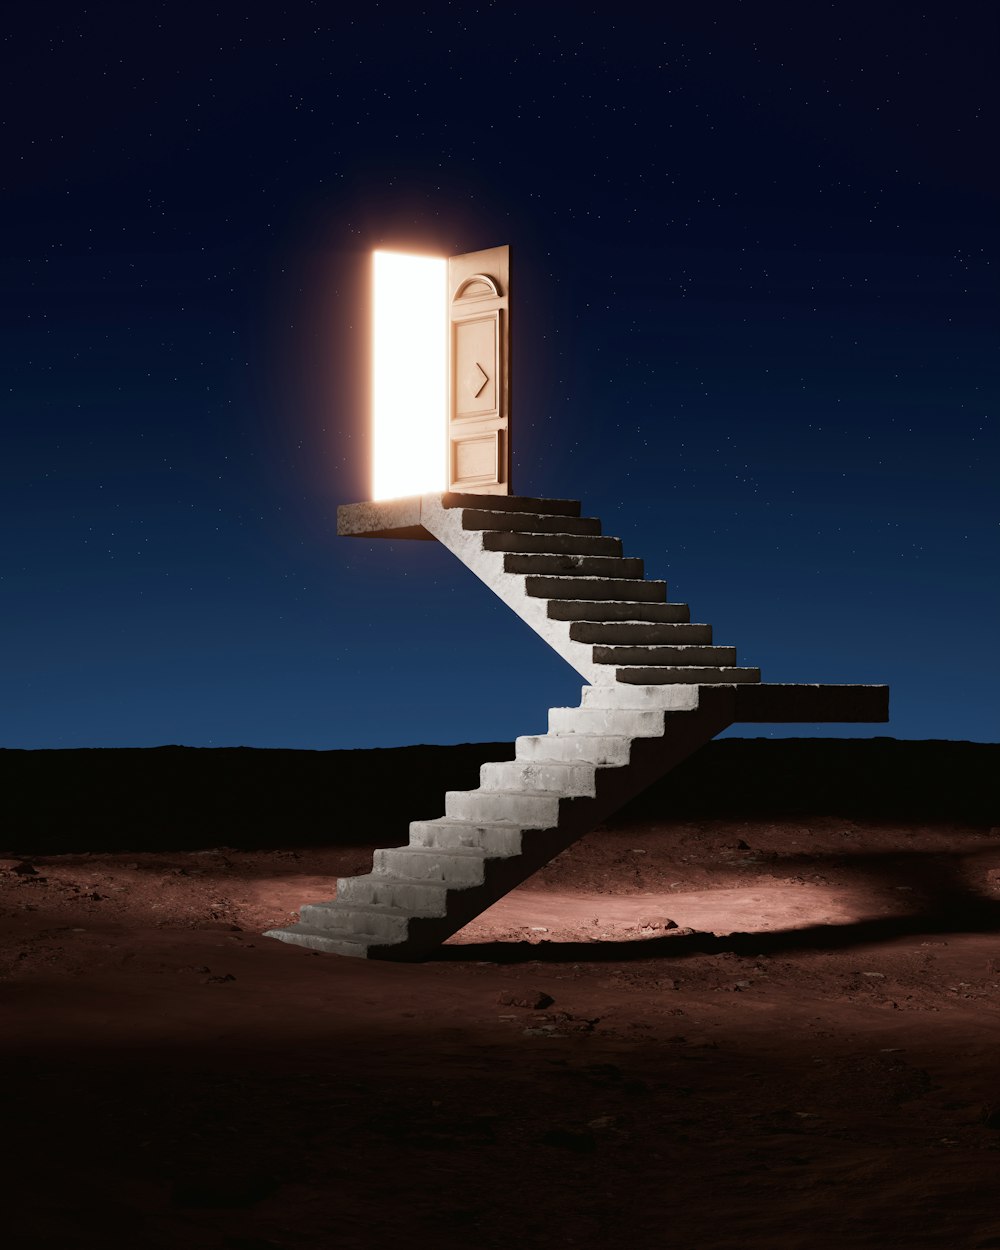 a staircase leading to an open door in the desert